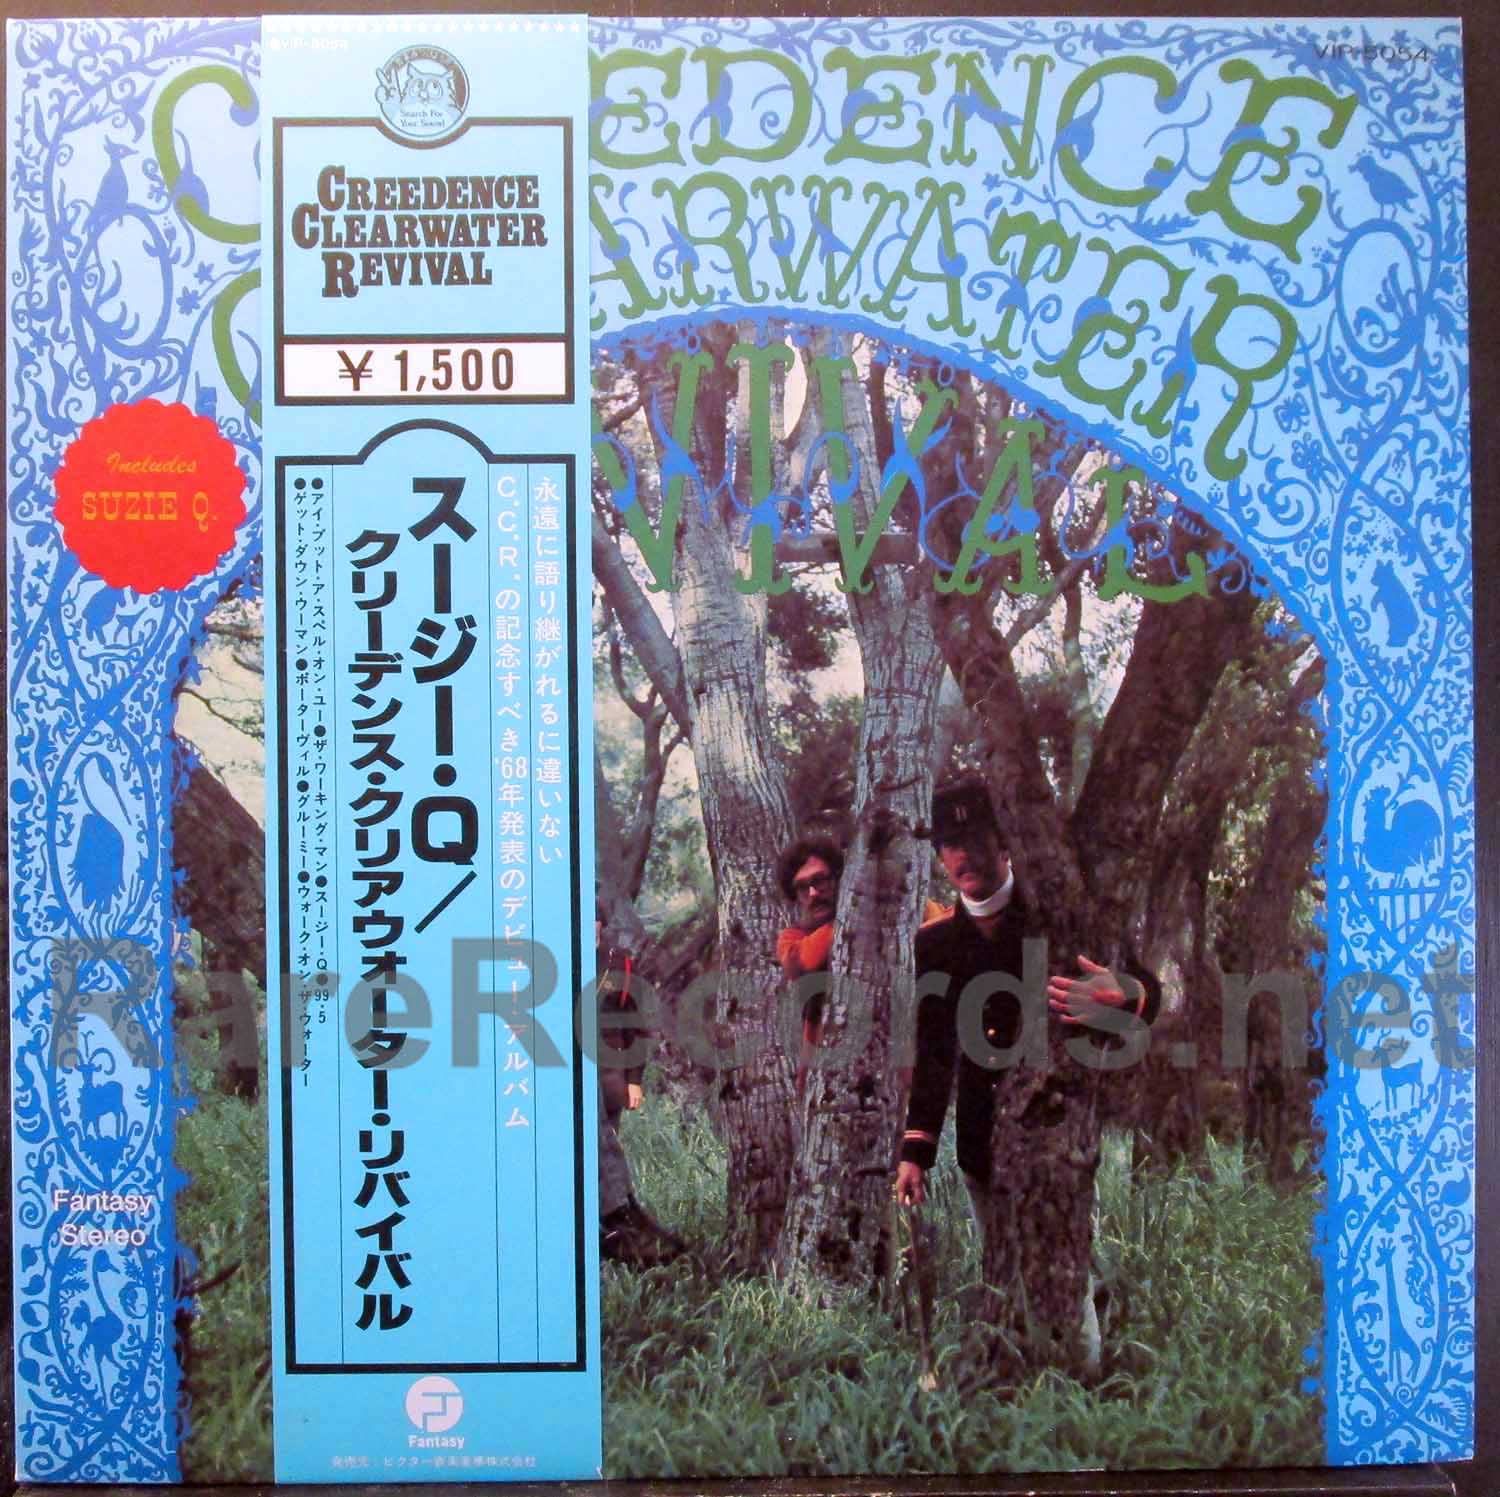 Creedence Clearwater Revival – Creedence Clearwater Revival 1978